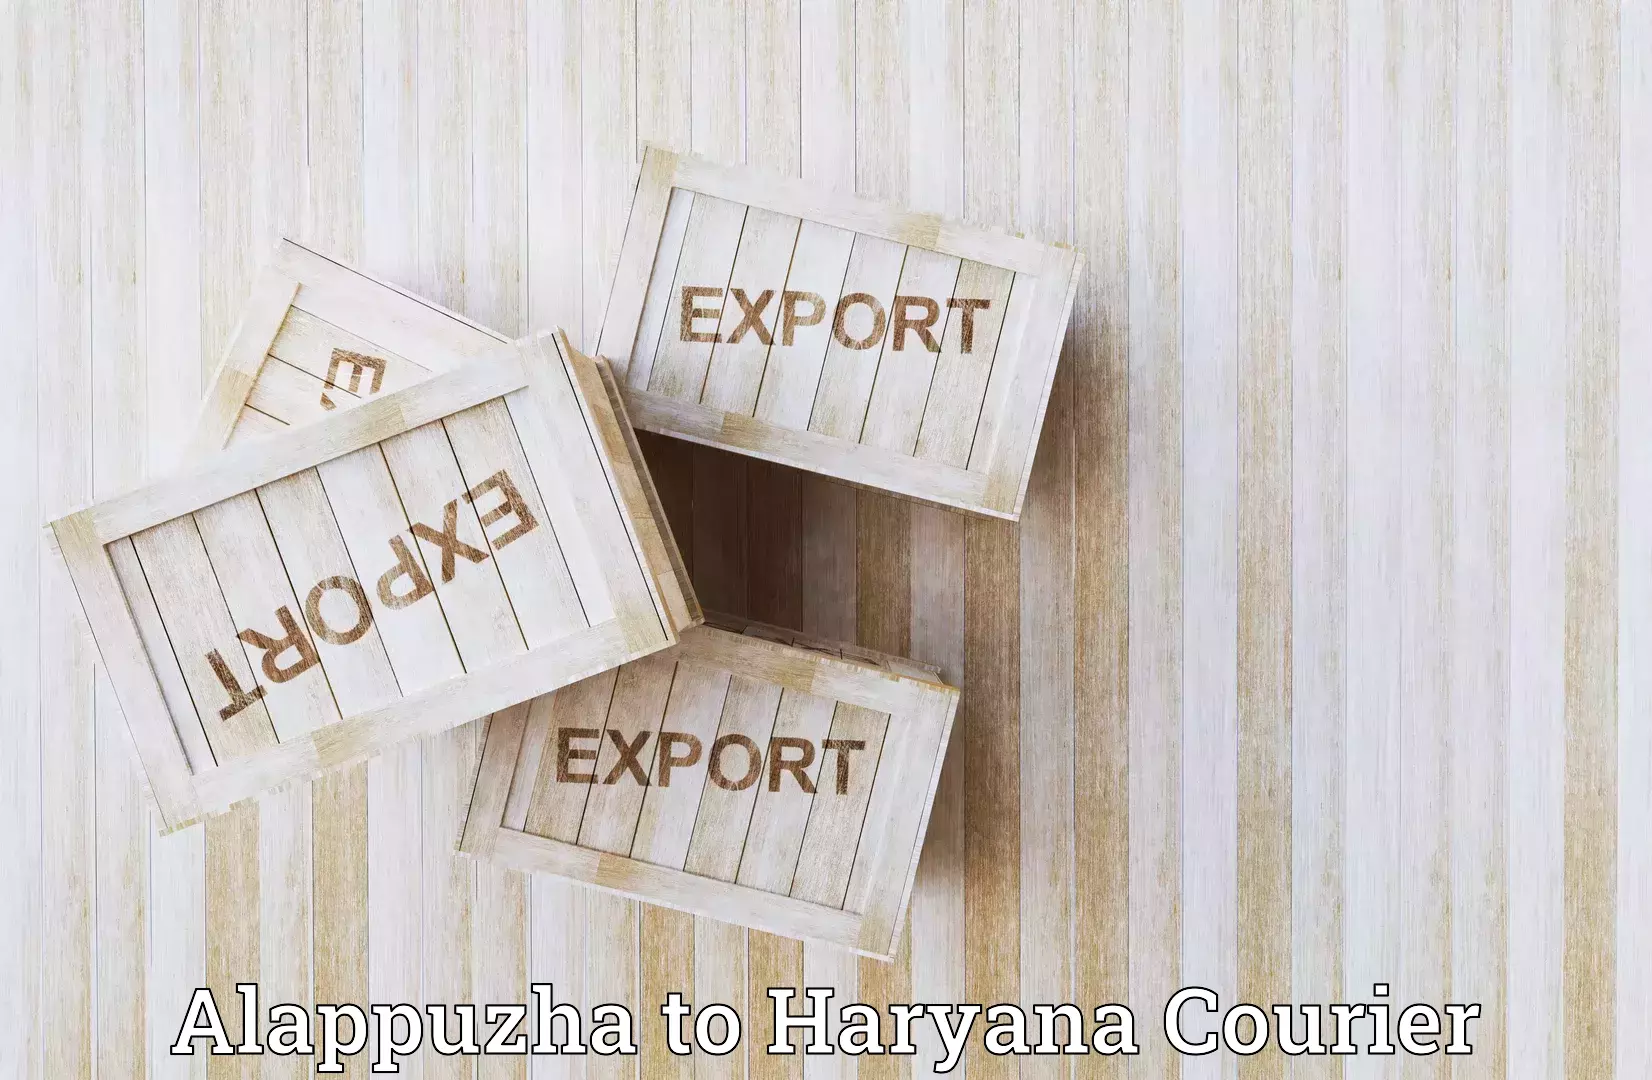 User-friendly delivery service Alappuzha to NCR Haryana